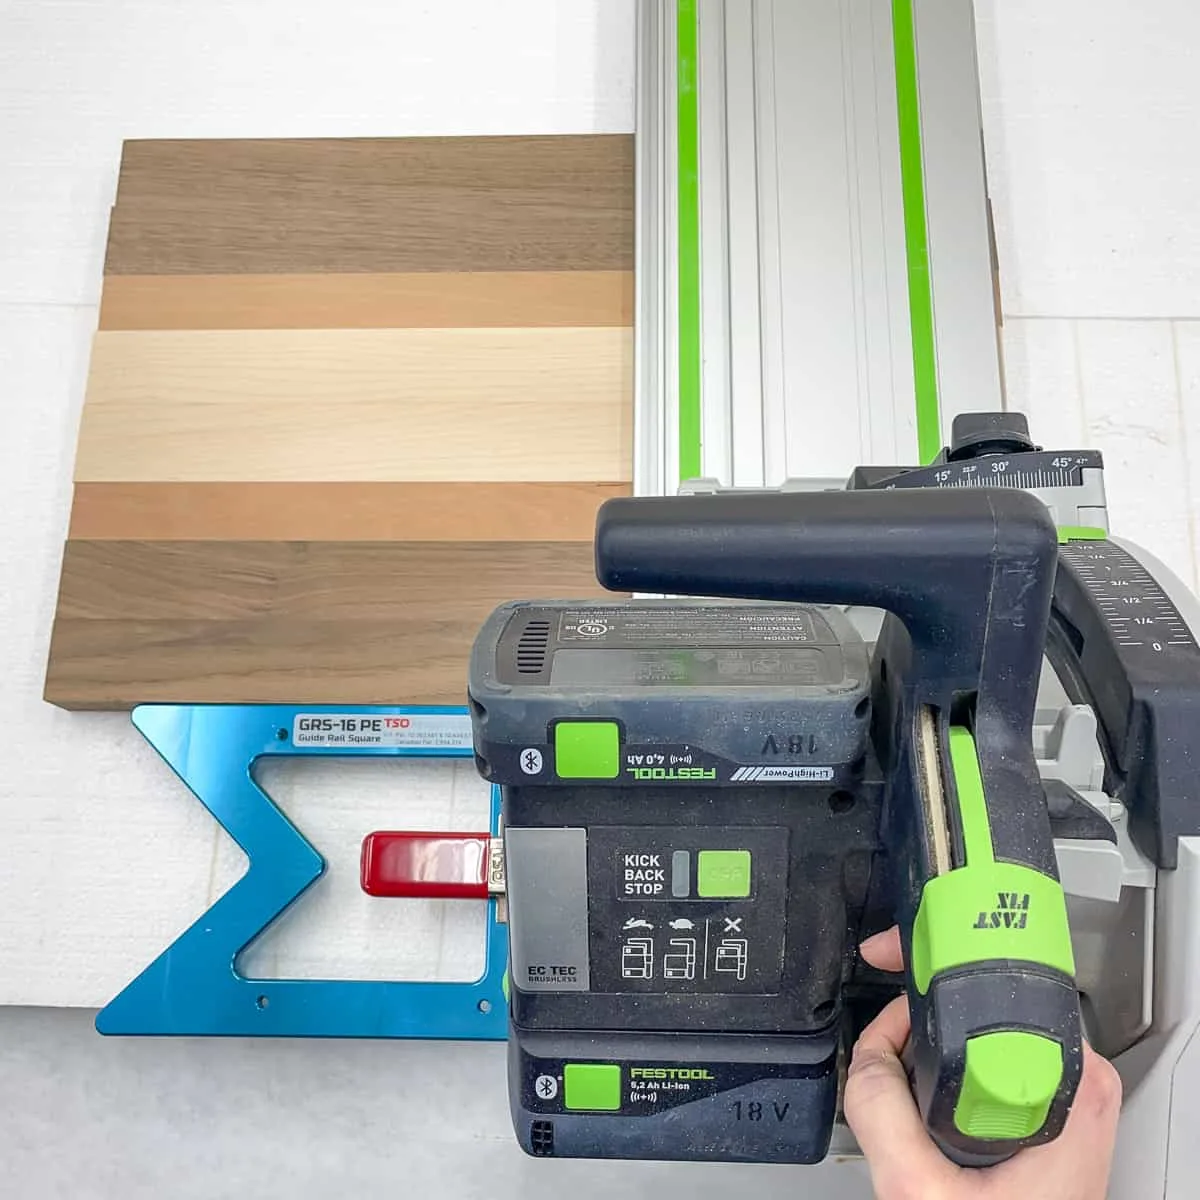 trimming off uneven ends of cutting board with a track saw